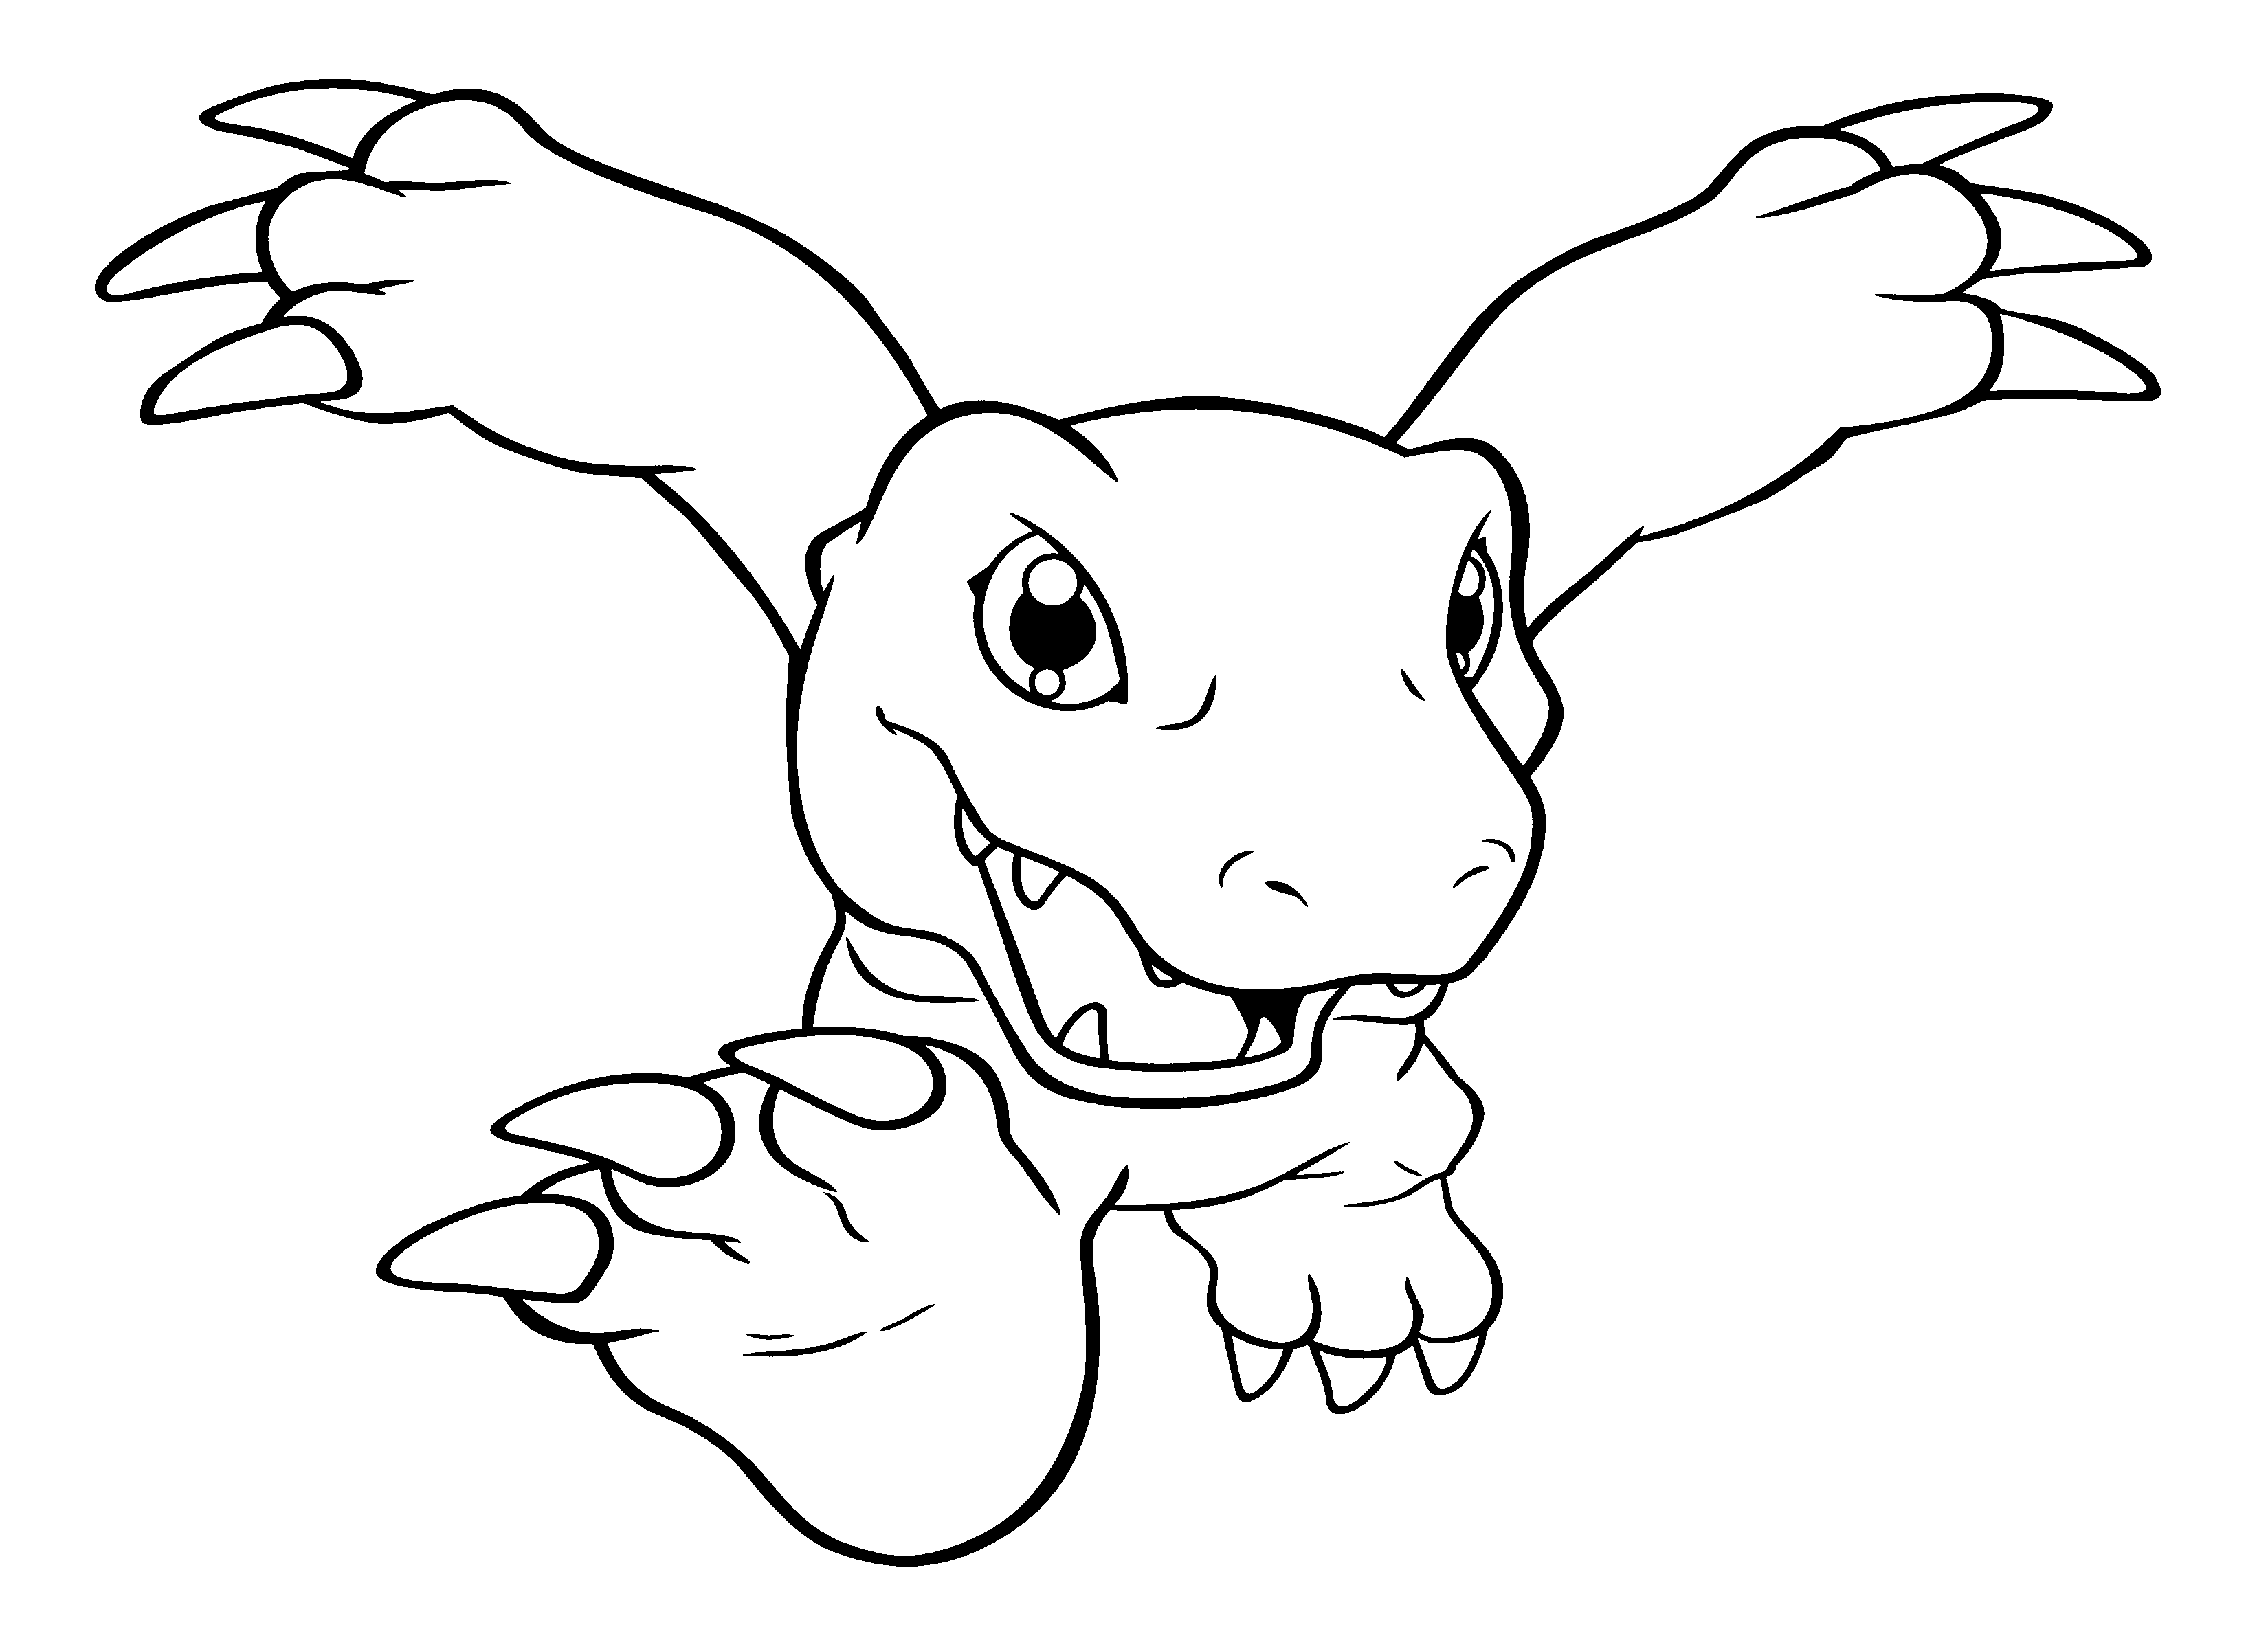 Coloring pages Digimon (Cartoons) – Printable Coloring Pages